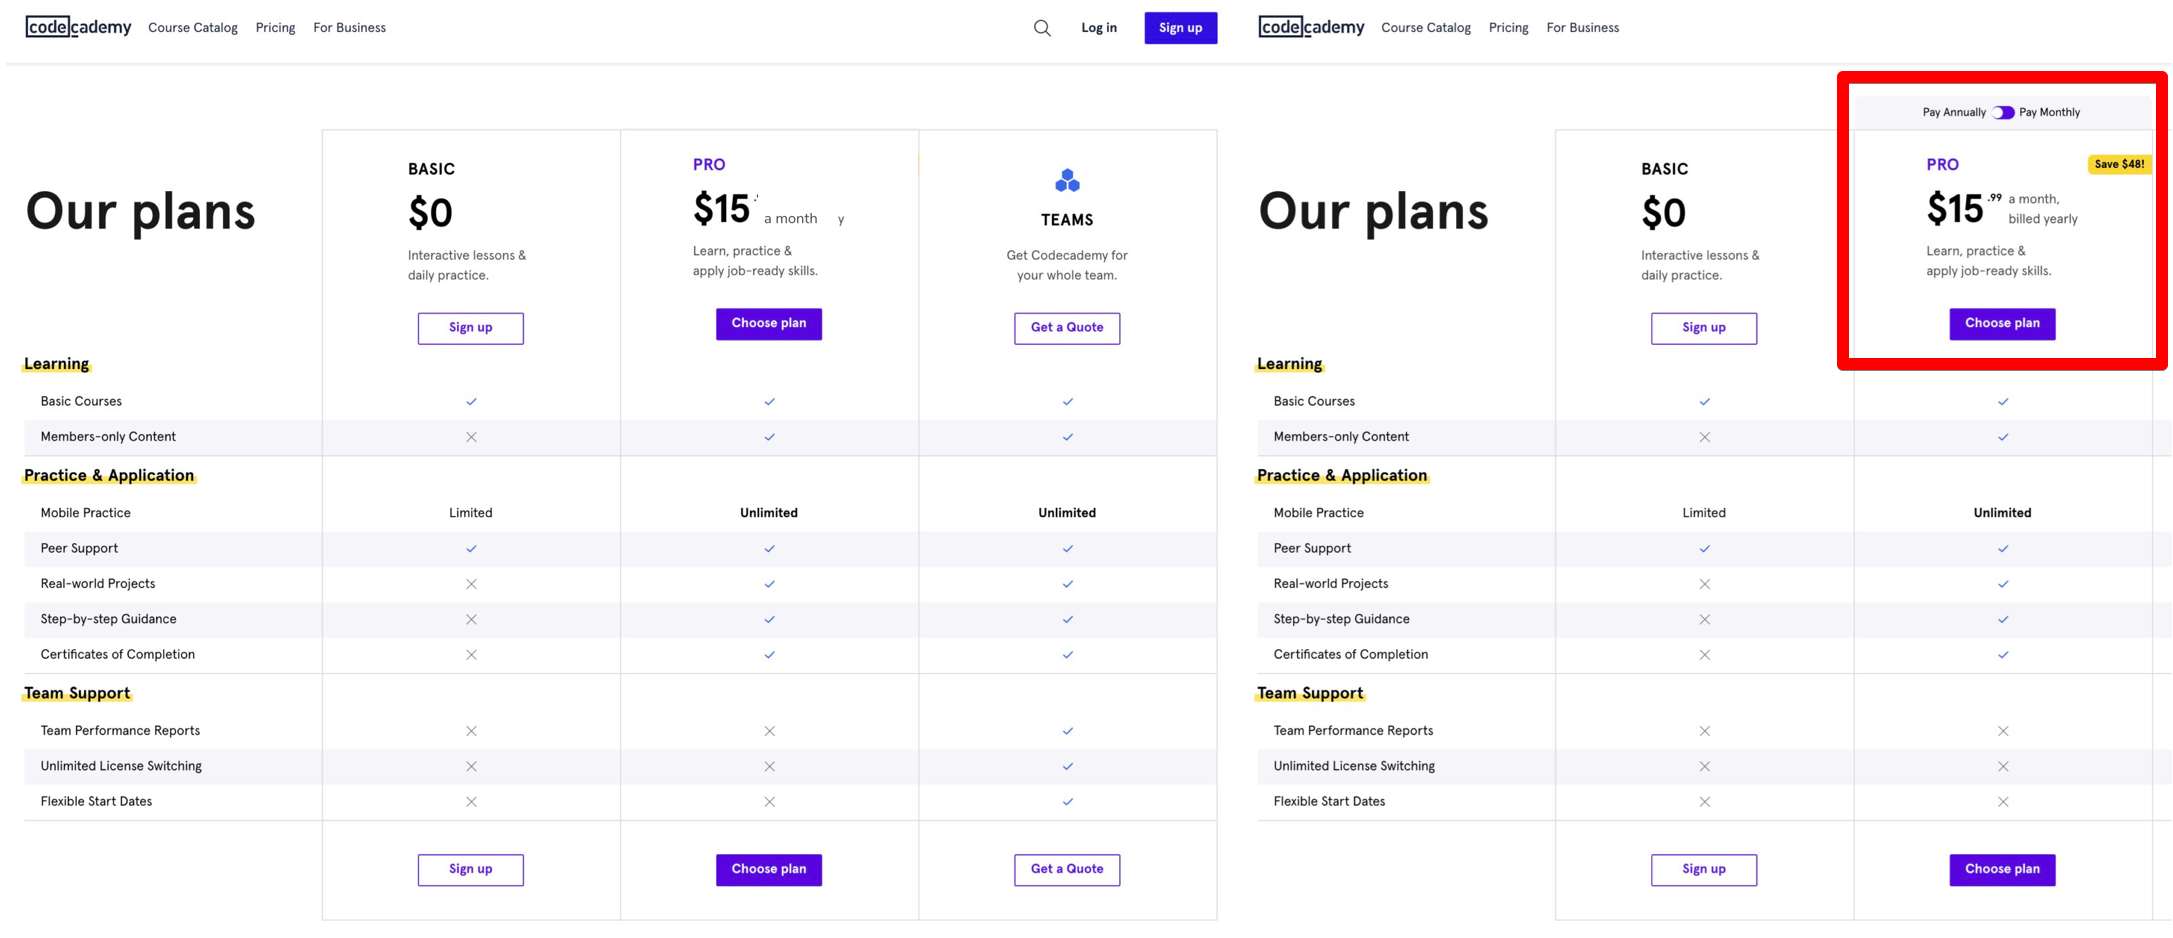 Showing the savings of the yearly plan on the pricing page